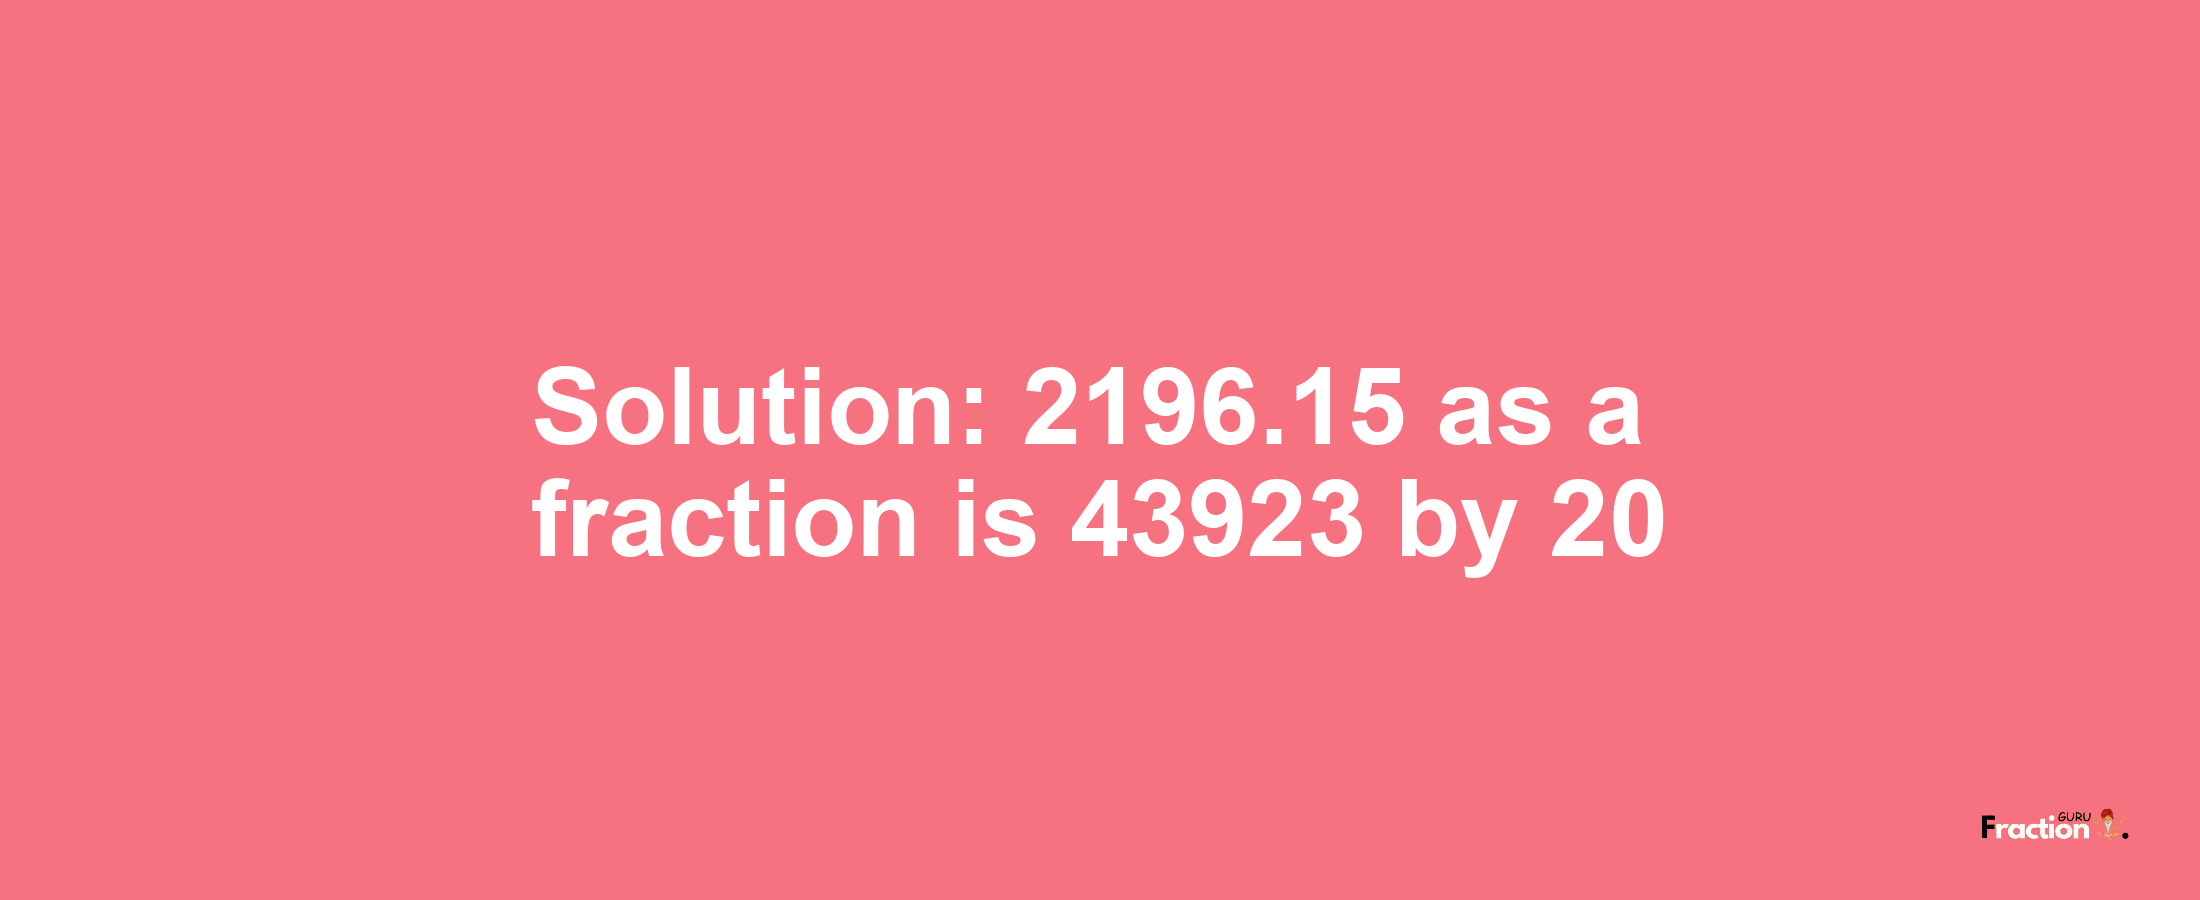 Solution:2196.15 as a fraction is 43923/20